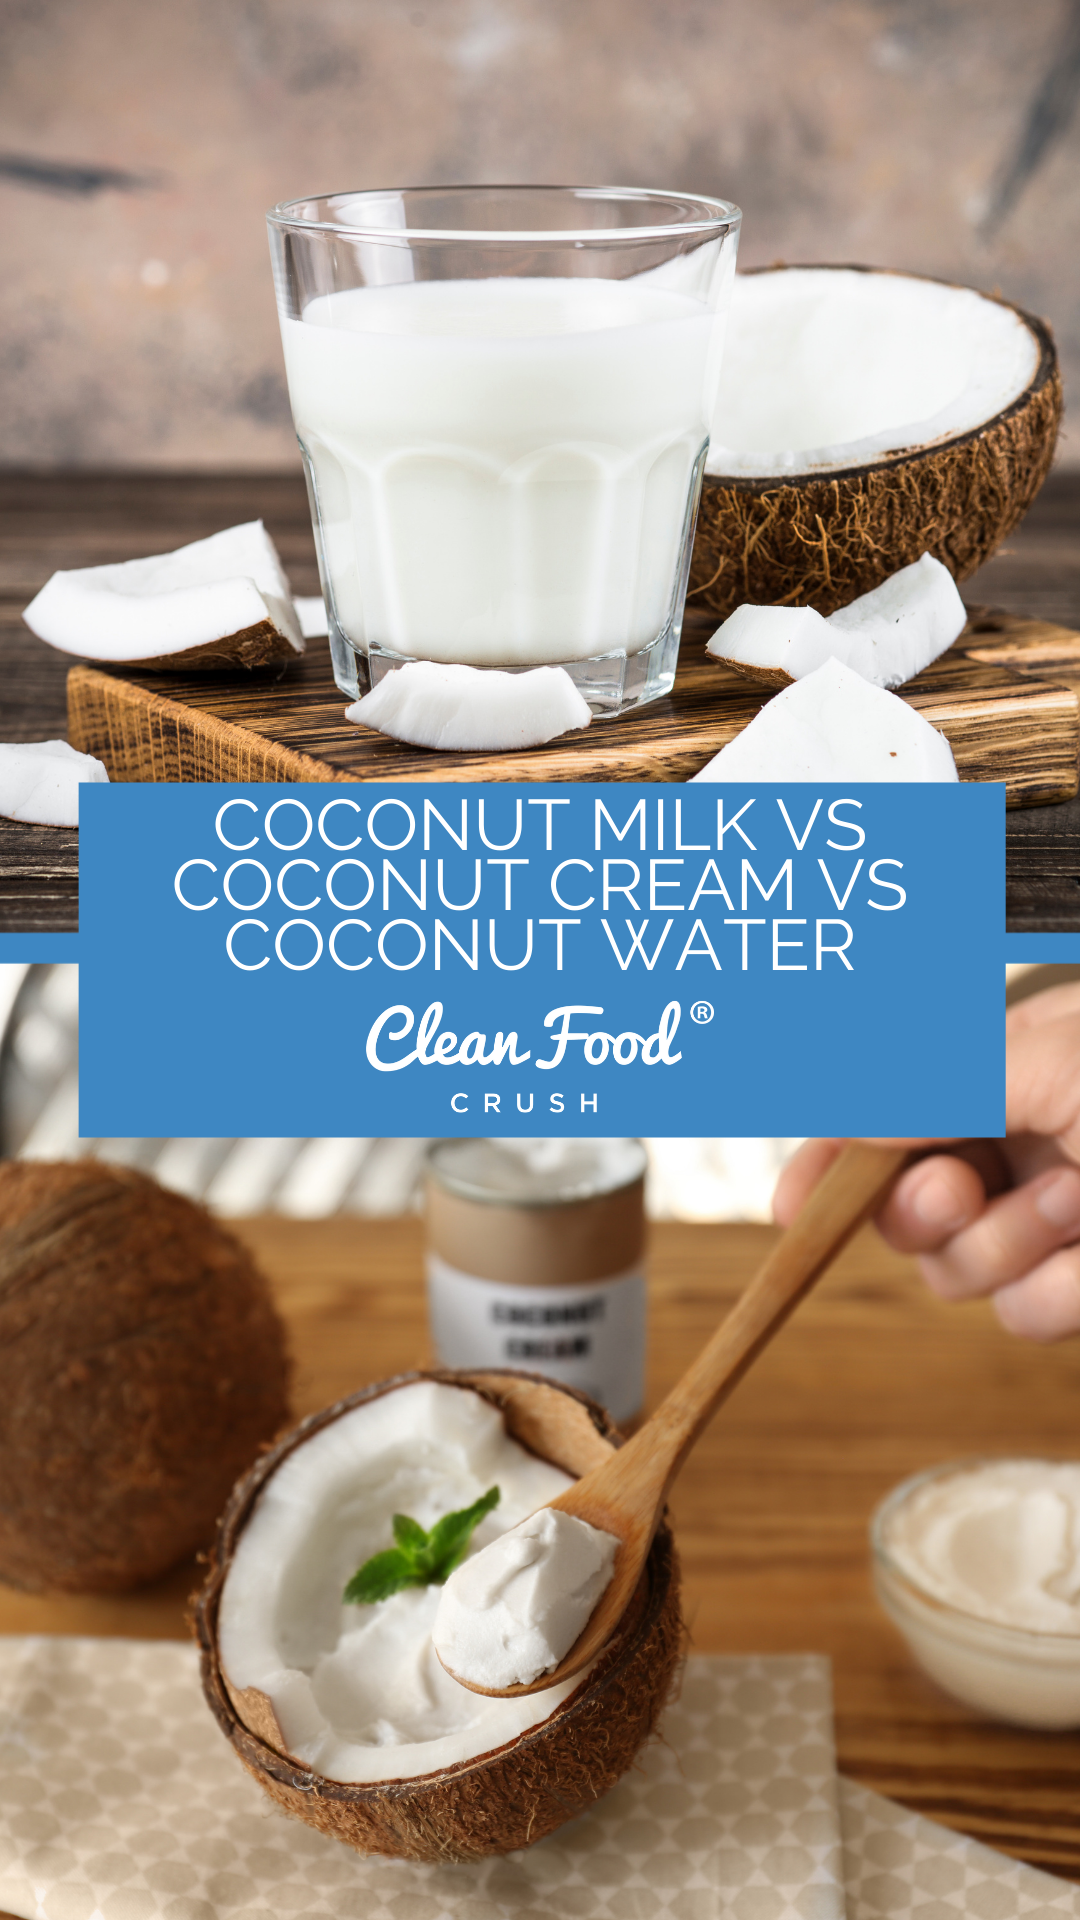 What Is Cream of Coconut?